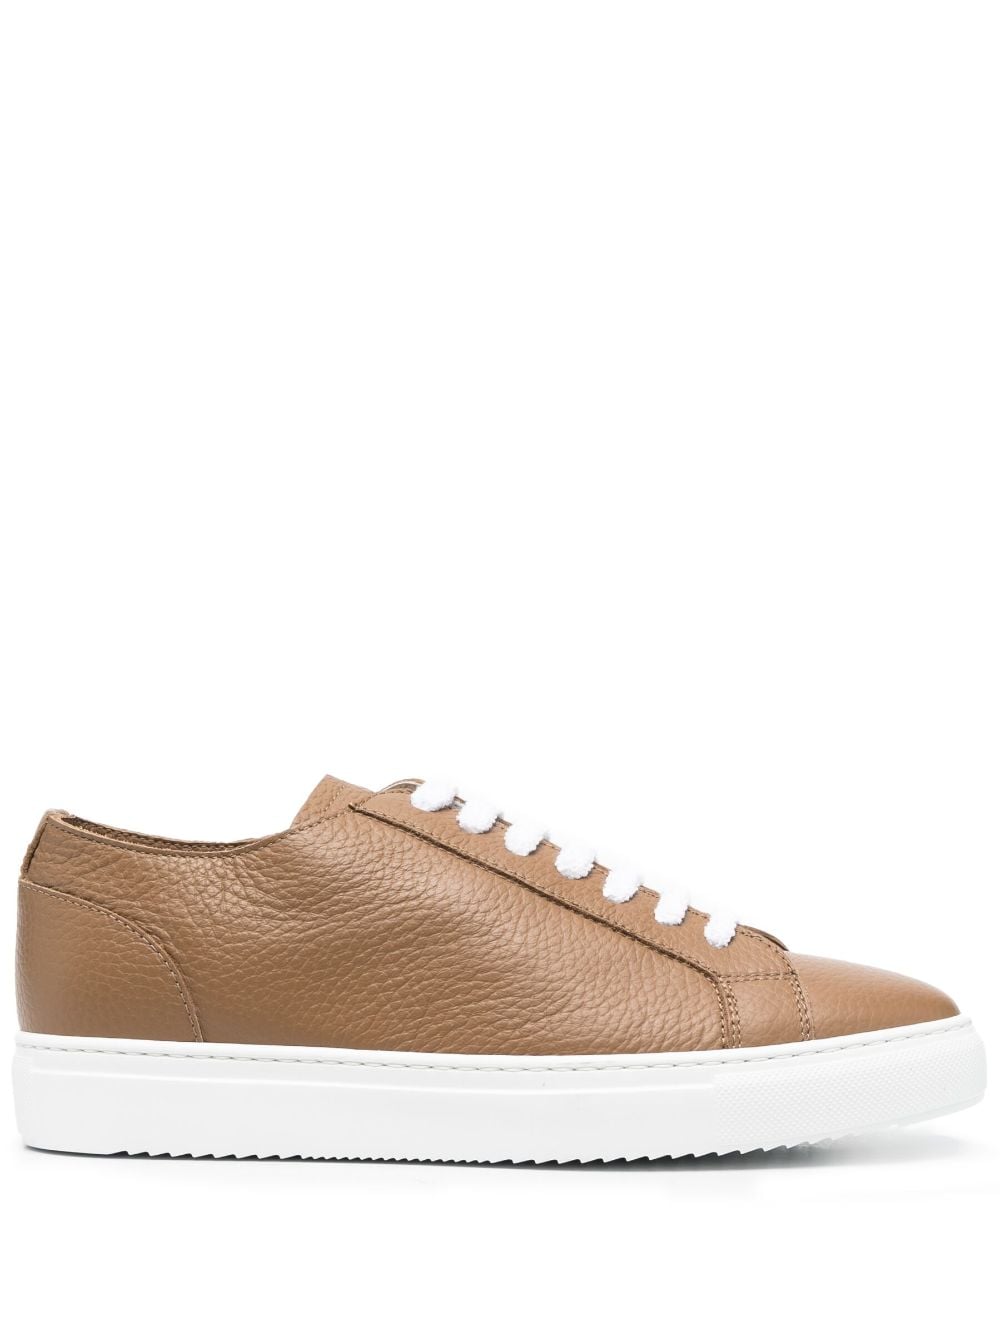 Doucal's low-top leather sneakers - Brown von Doucal's